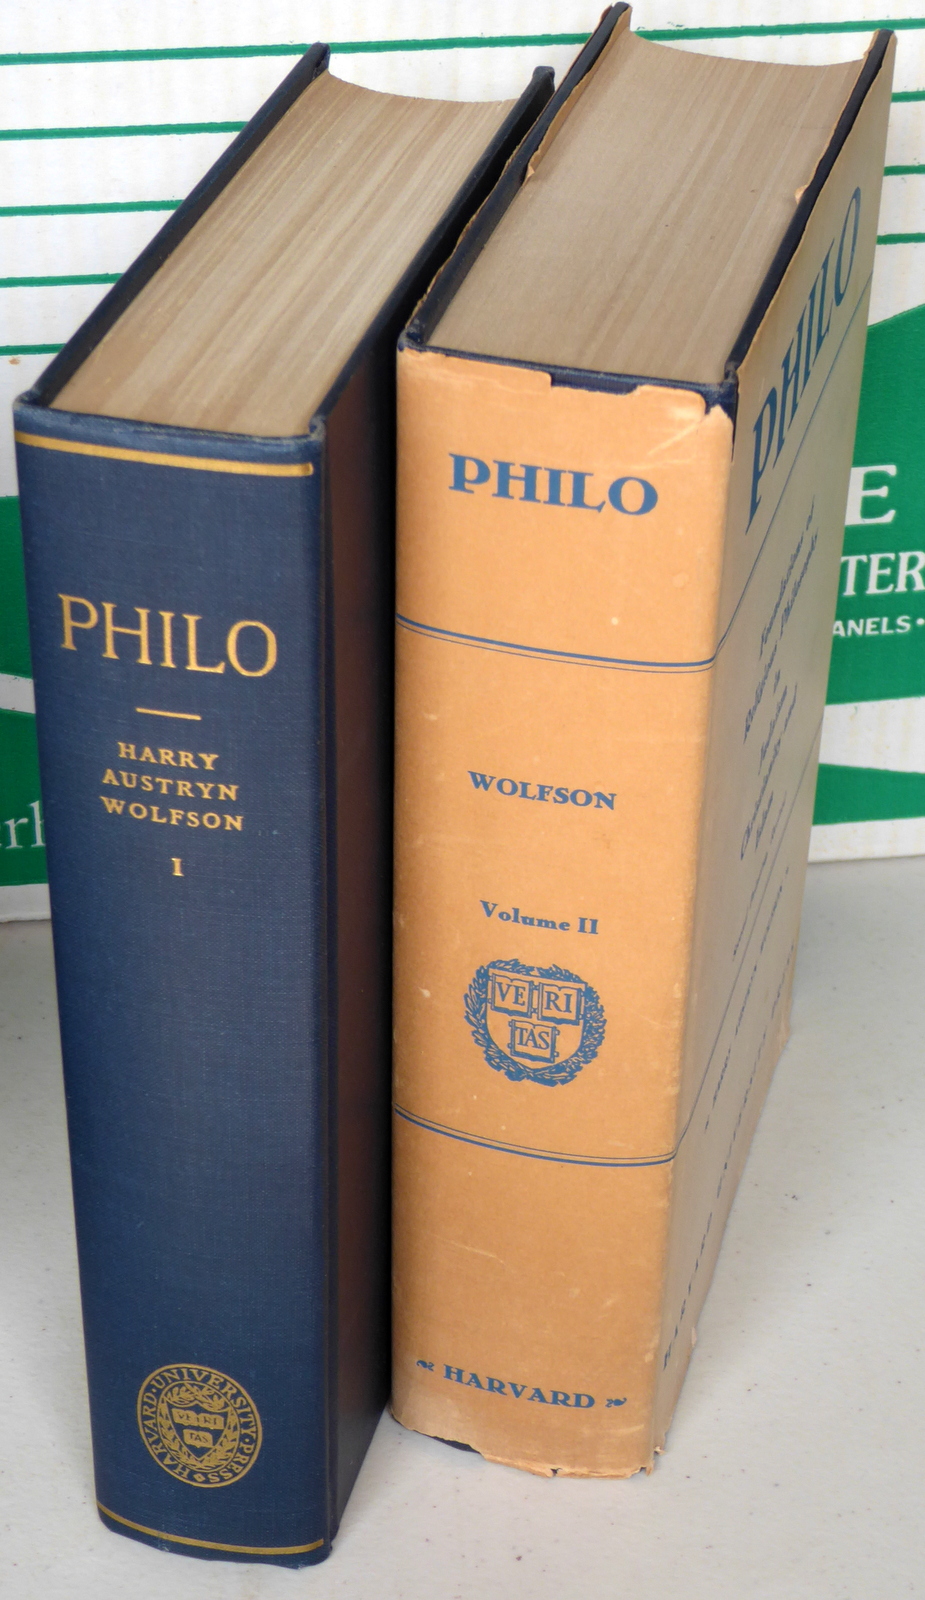 PHILO: FOUNDATIONS OF RELIGIOUS PHILOSOPHY IN JUDAISM, CHRISTIANITY AND ISLAM (2 VOLUMES) - Wolfson, Harry Austryn.